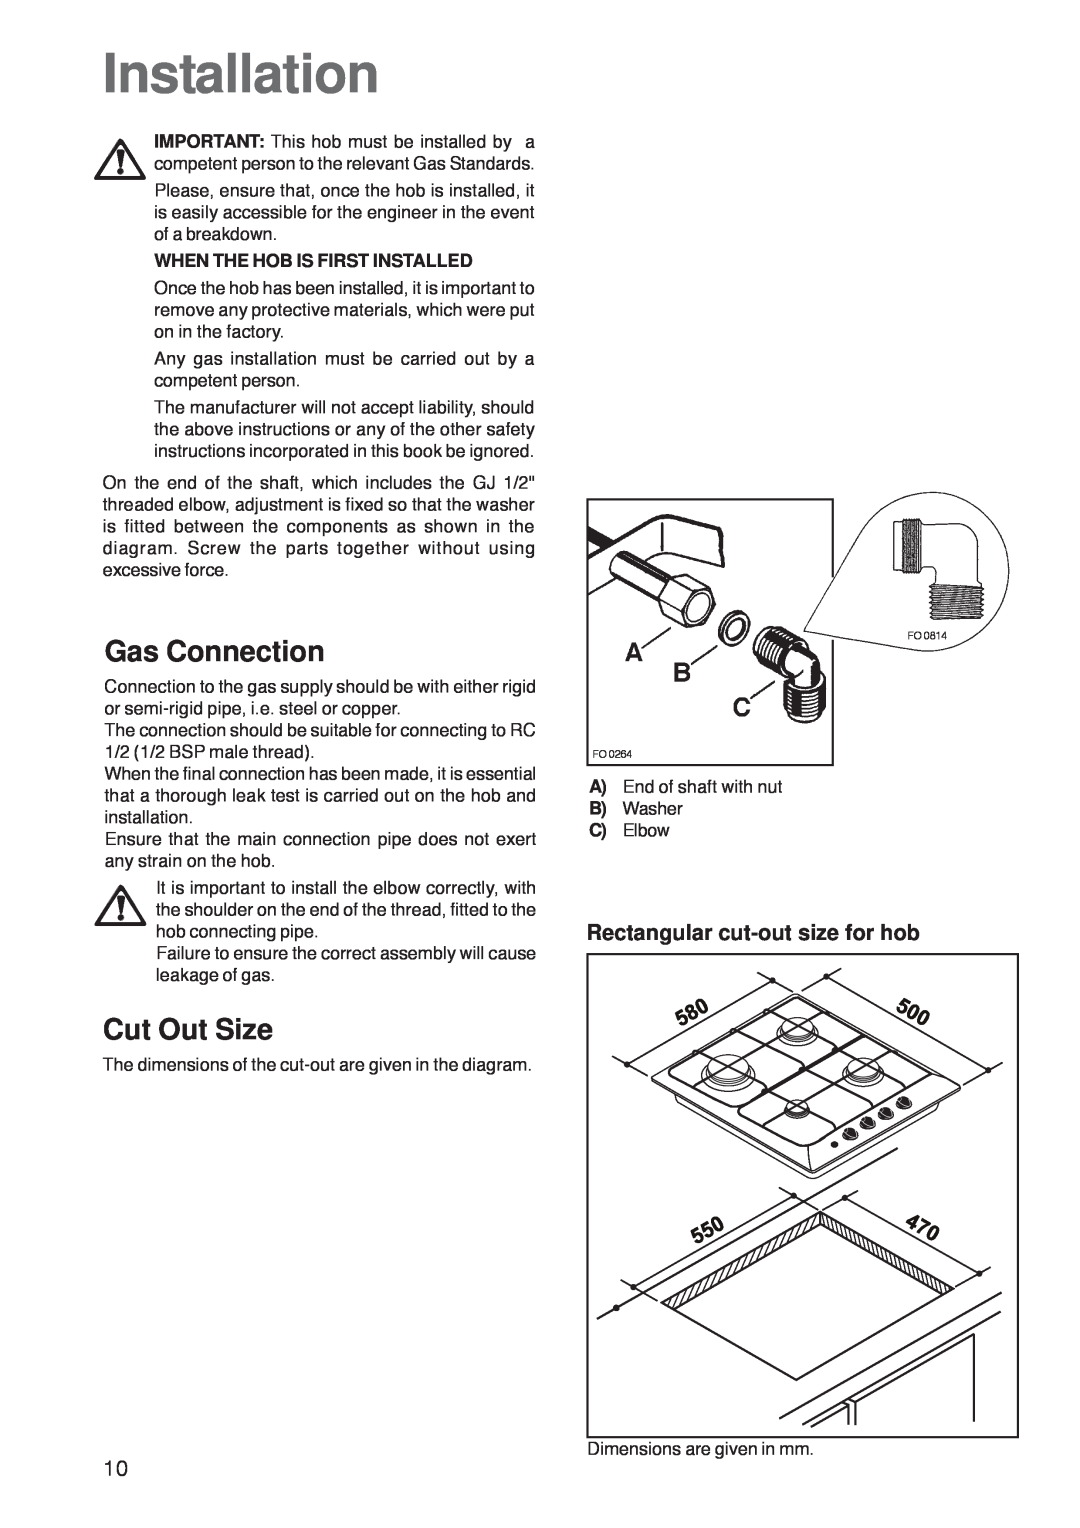 Zanussi ZGL 62 ITX manual Installation, Gas Connection, Cut Out Size, Rectangular cut-outsize for hob 